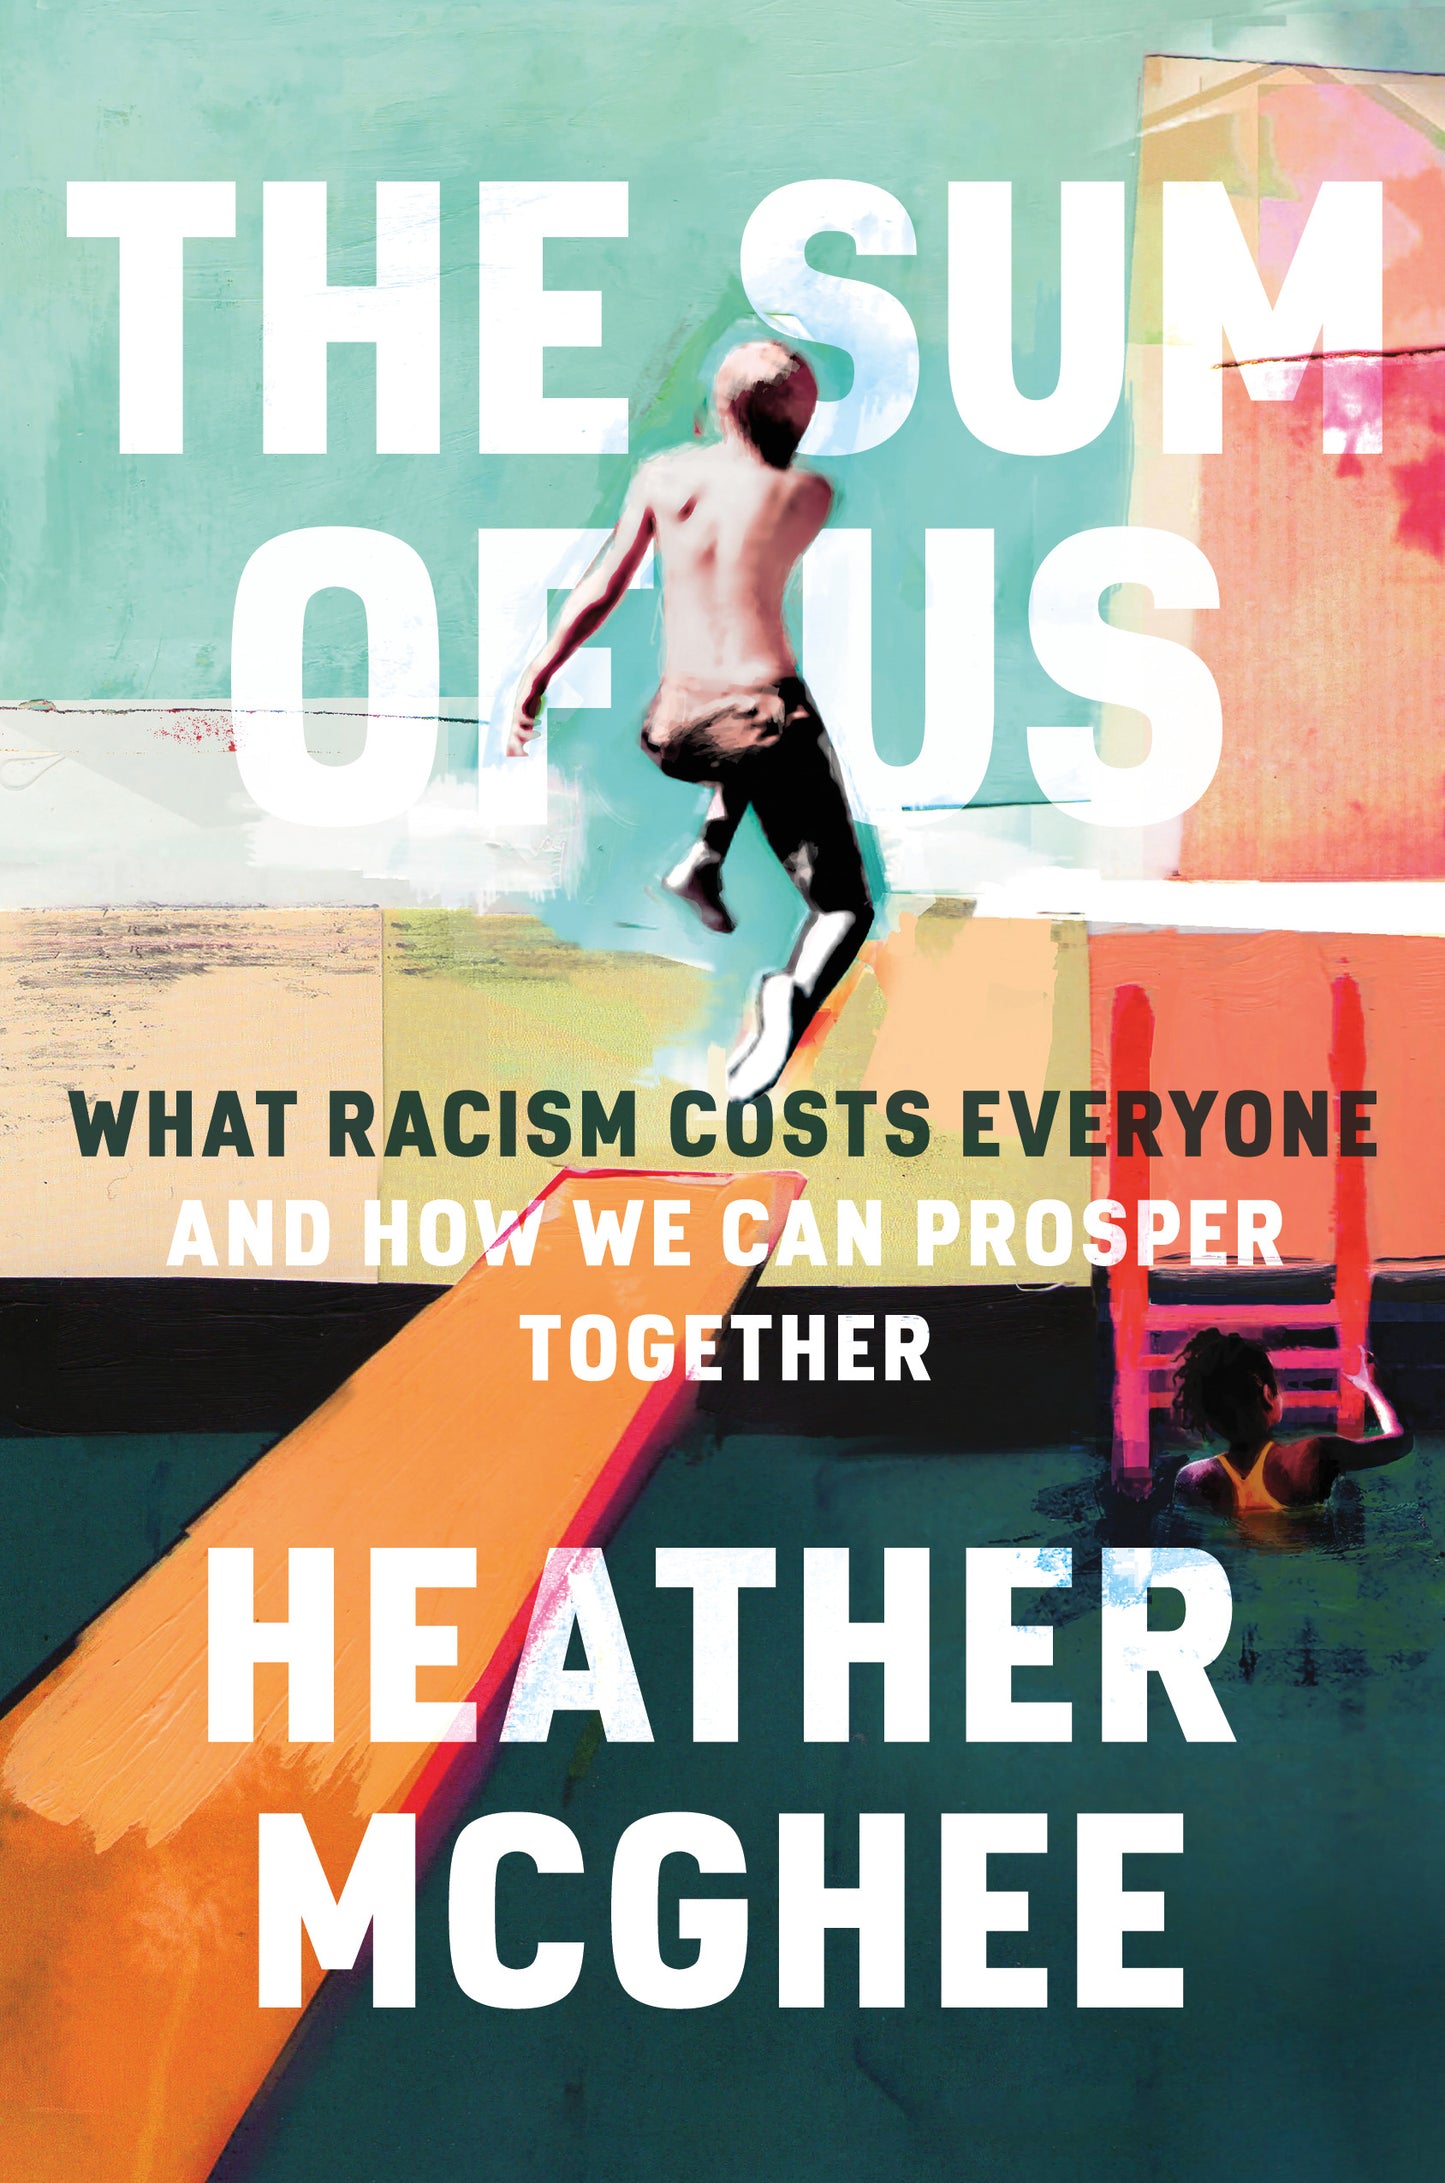 The Sum of Us: What Racism Costs Everyone and How We Can Prosper Together